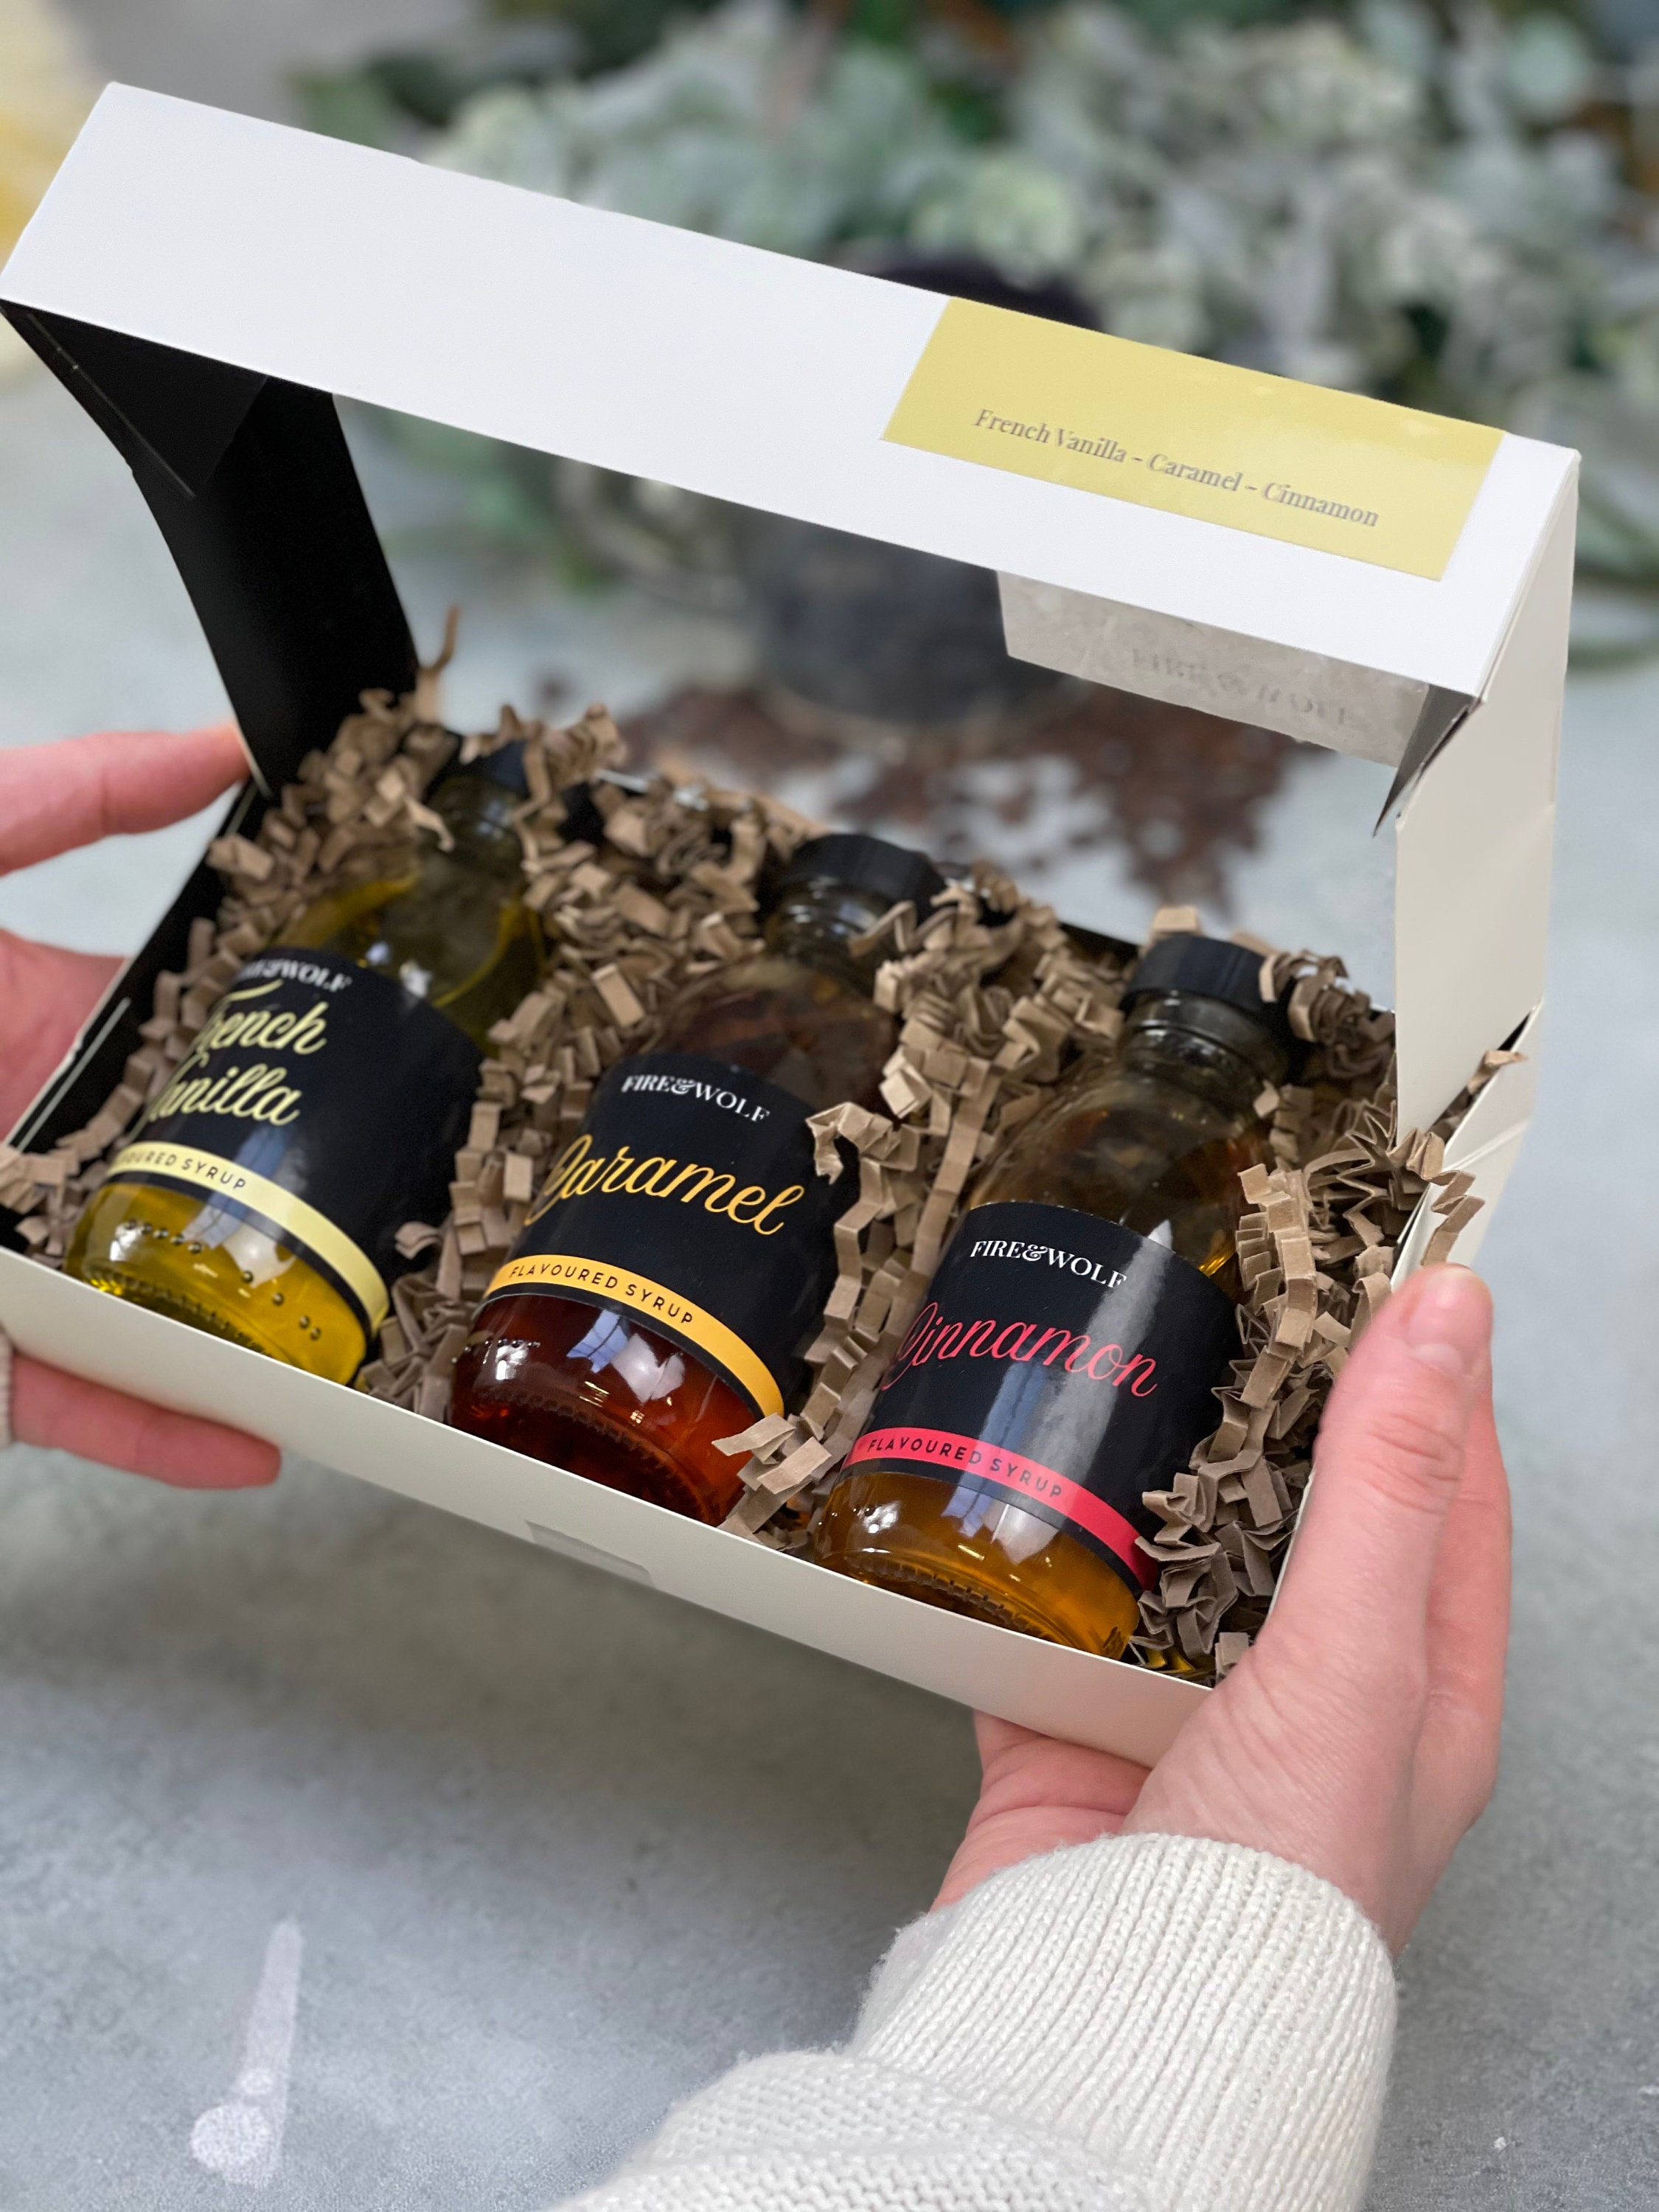 Coffee House Coffee Syrup Sampler Gift Set of 18